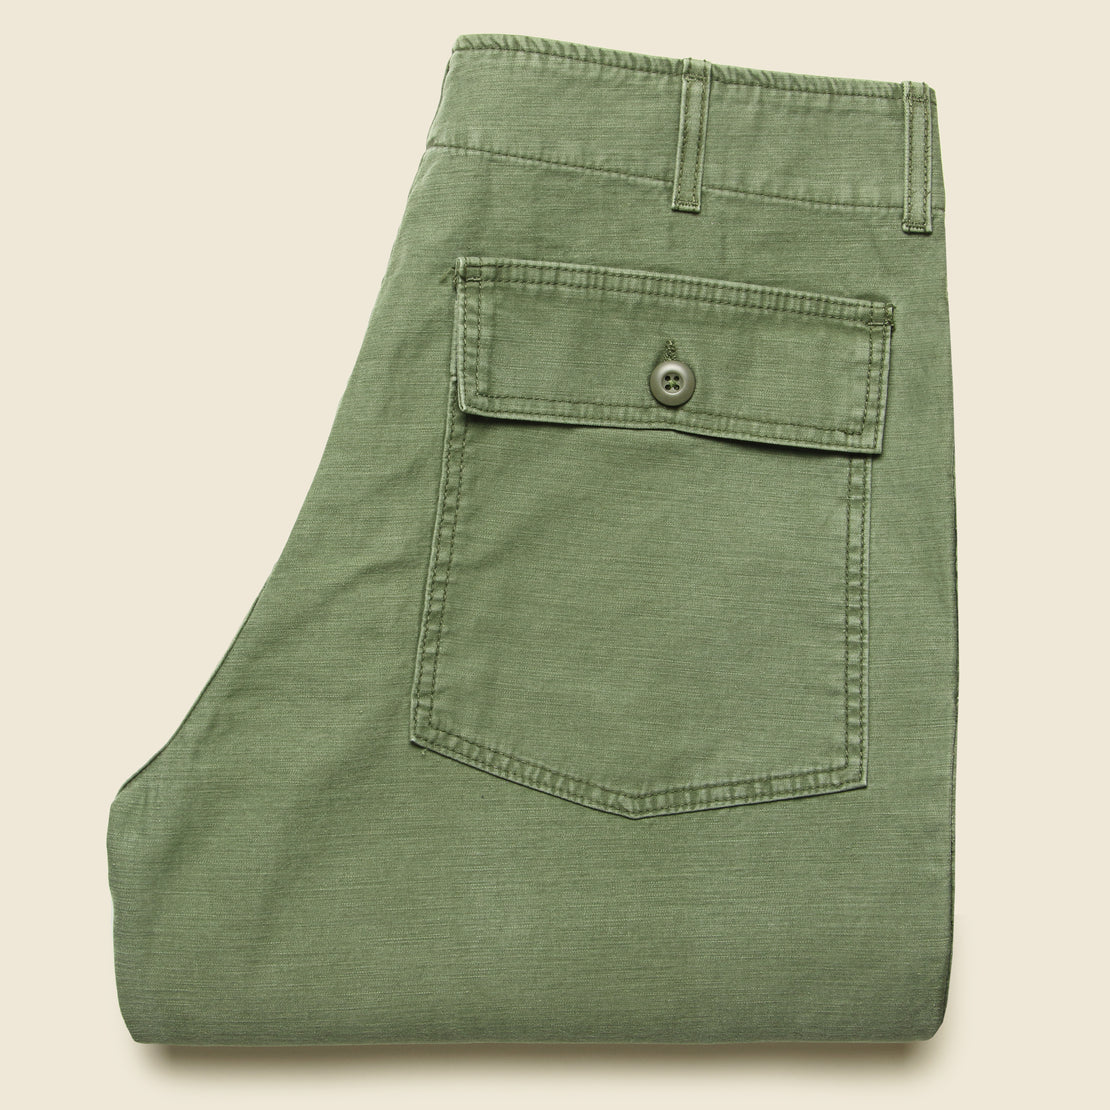 Oliver Military Trouser - Fatigue Green - Imogene + Willie - STAG Provisions - Pants - Twill